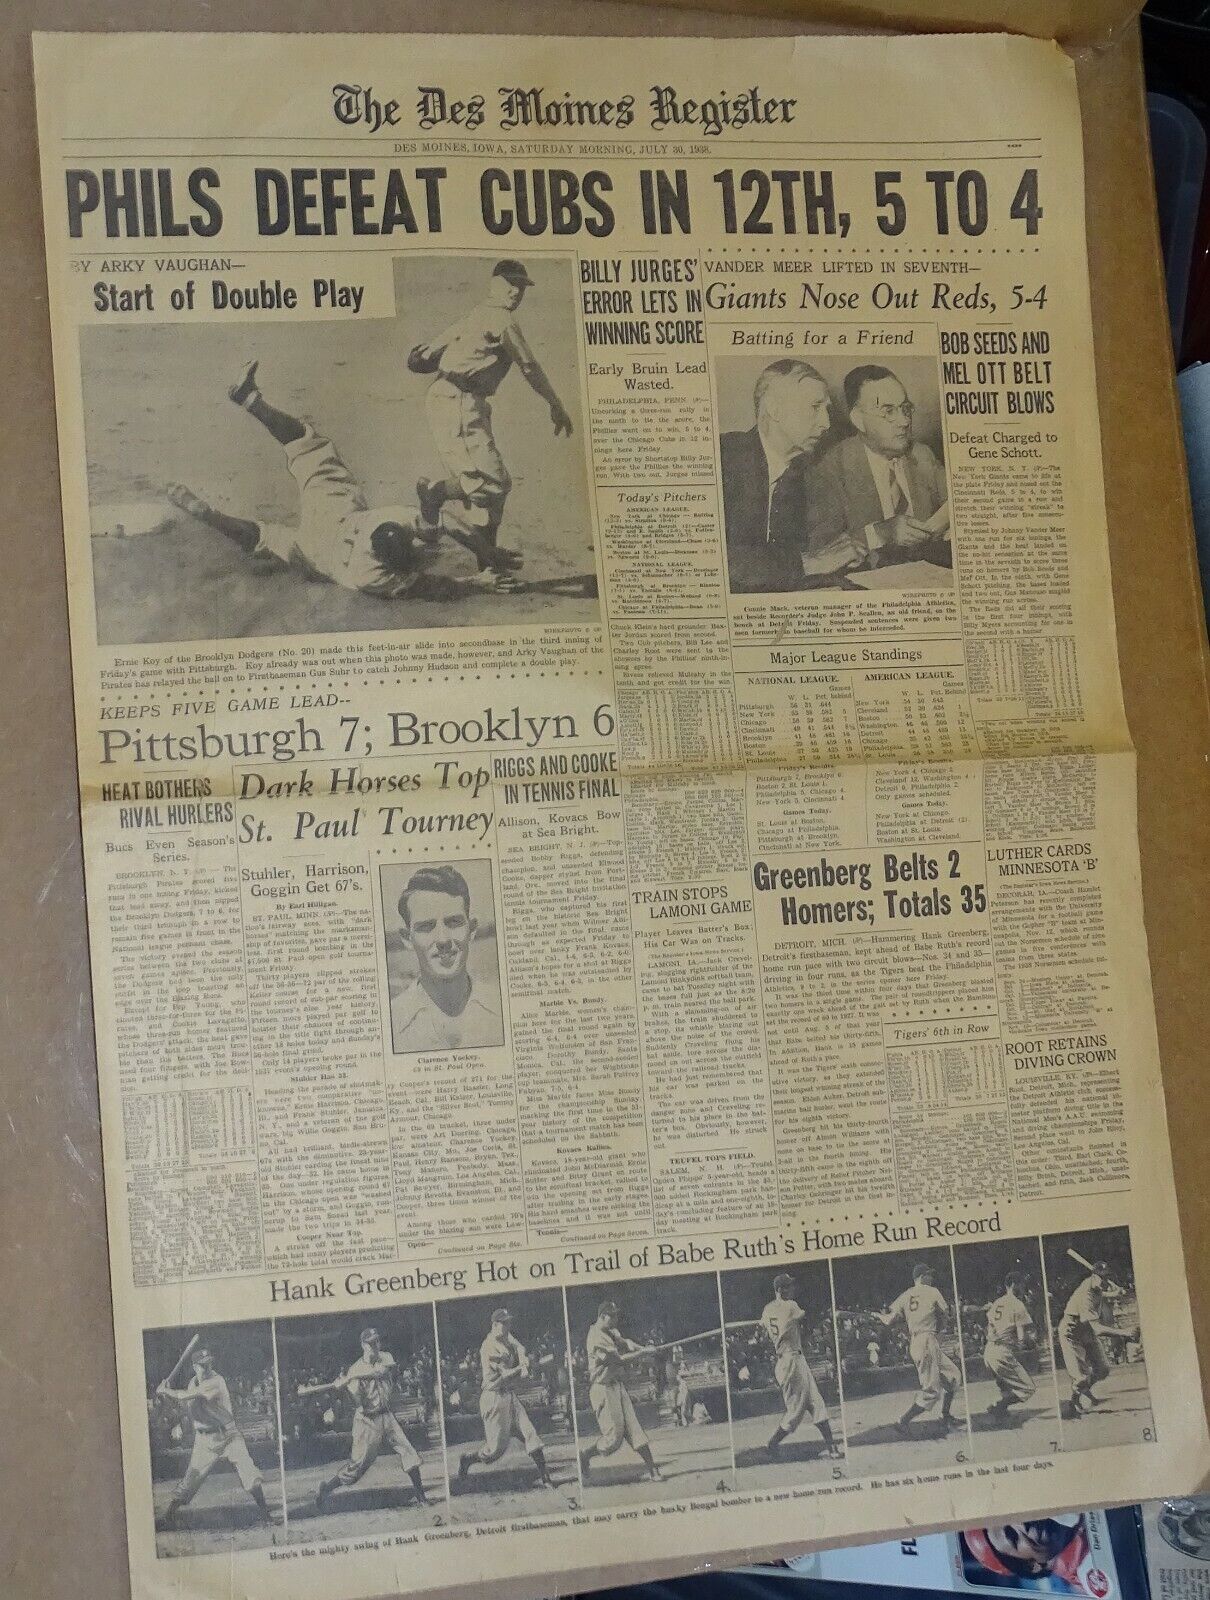 Hank Greenberg Chases Babe Ruth's HR Record 1938 Des Moines Iowa Sports Section